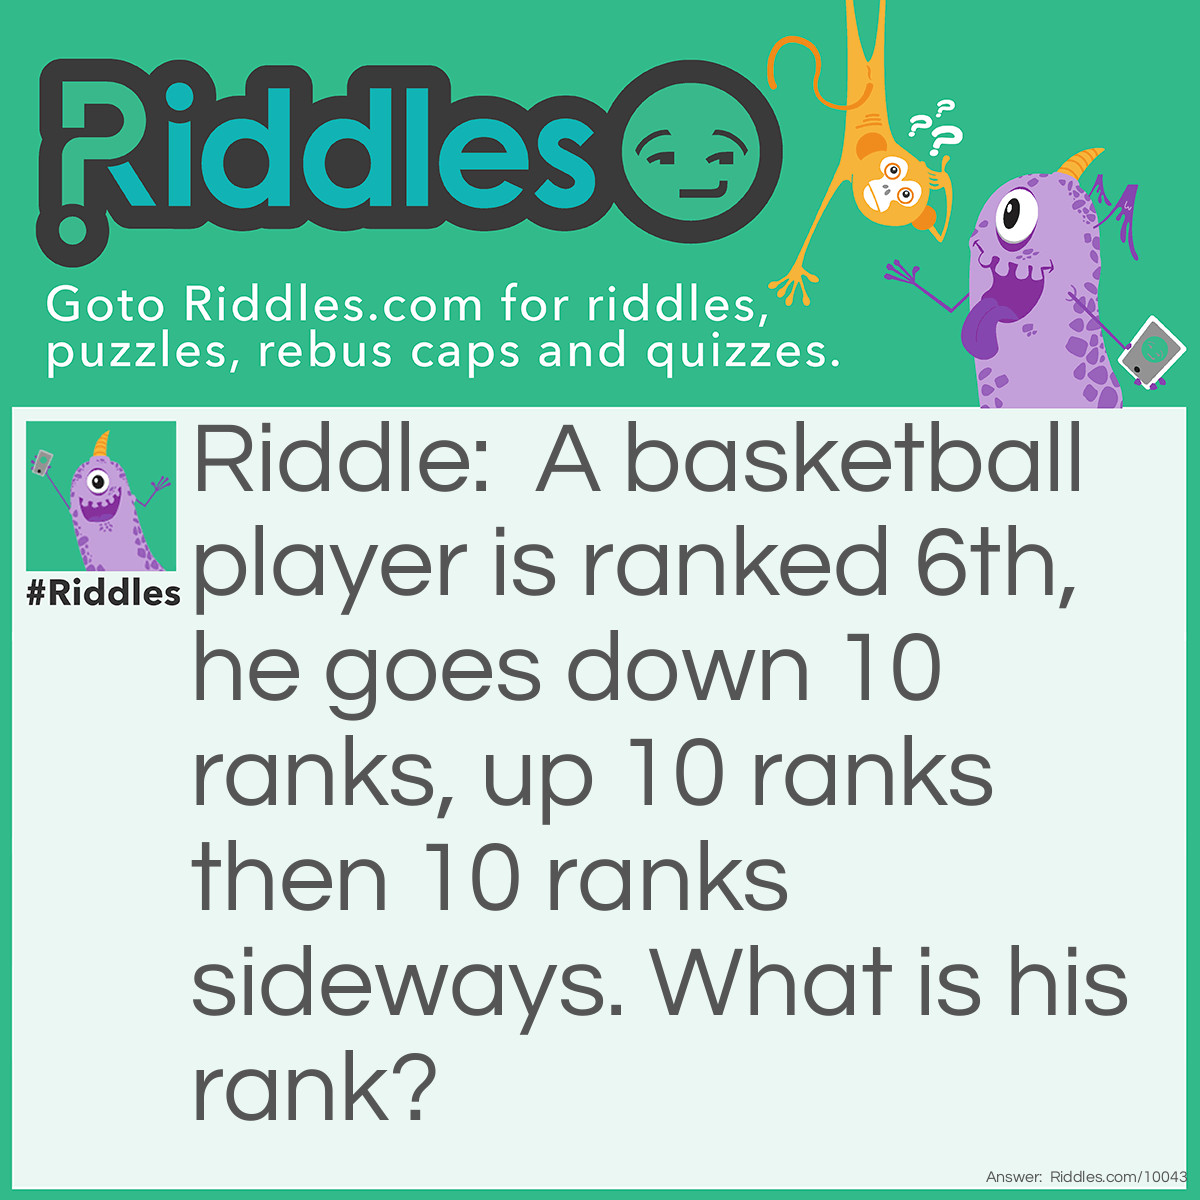 Riddle: A basketball player is ranked 6th, he goes down 10 ranks, up 10 ranks then 10 ranks sideways. What is his rank? Answer: 6th, because sideways ranking doesn't exist.